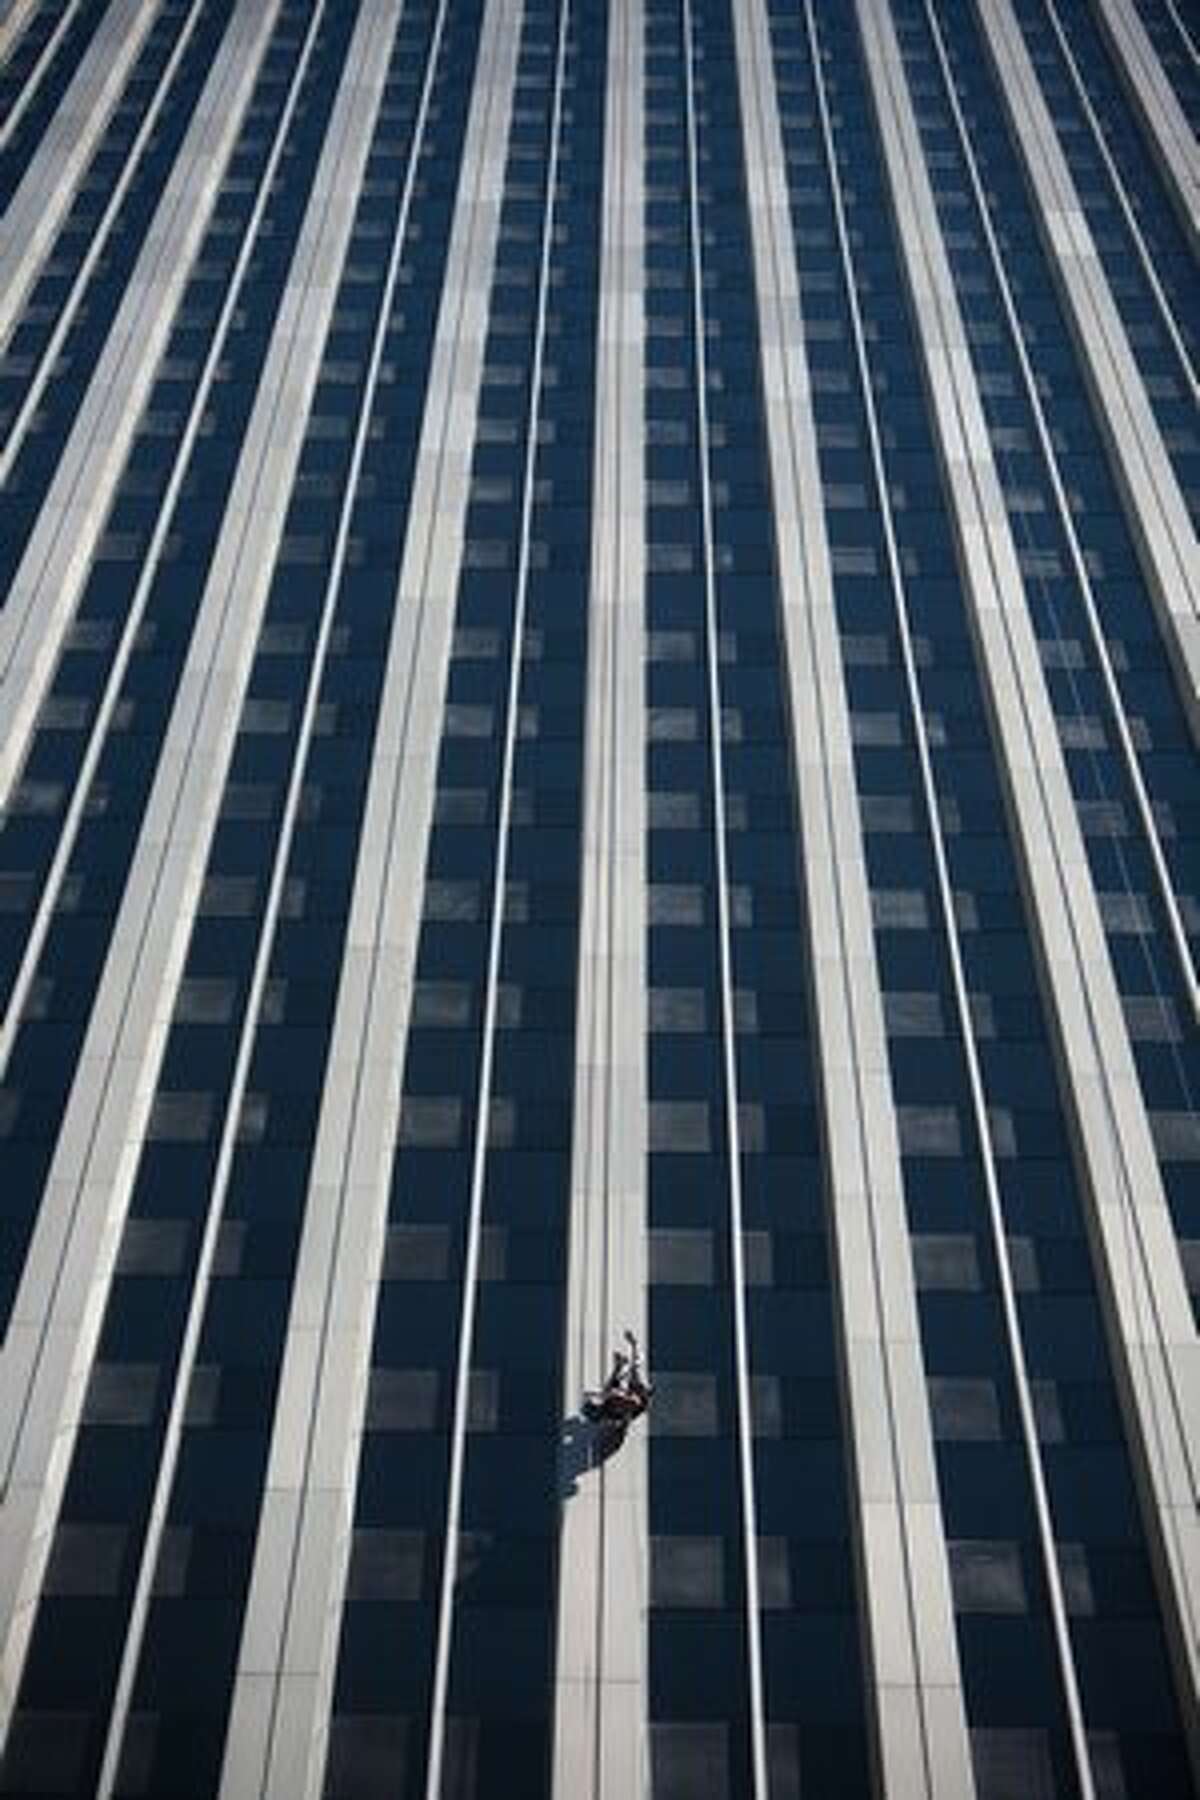 Mandy Crayton hangs upside down during "Over the Edge," a fundraiser for Special Olympics Washington. Crayton usually works in the skyscraper but on Saturday she was one of 112 people scheduled to rappel off the 40 story Rainier Tower.